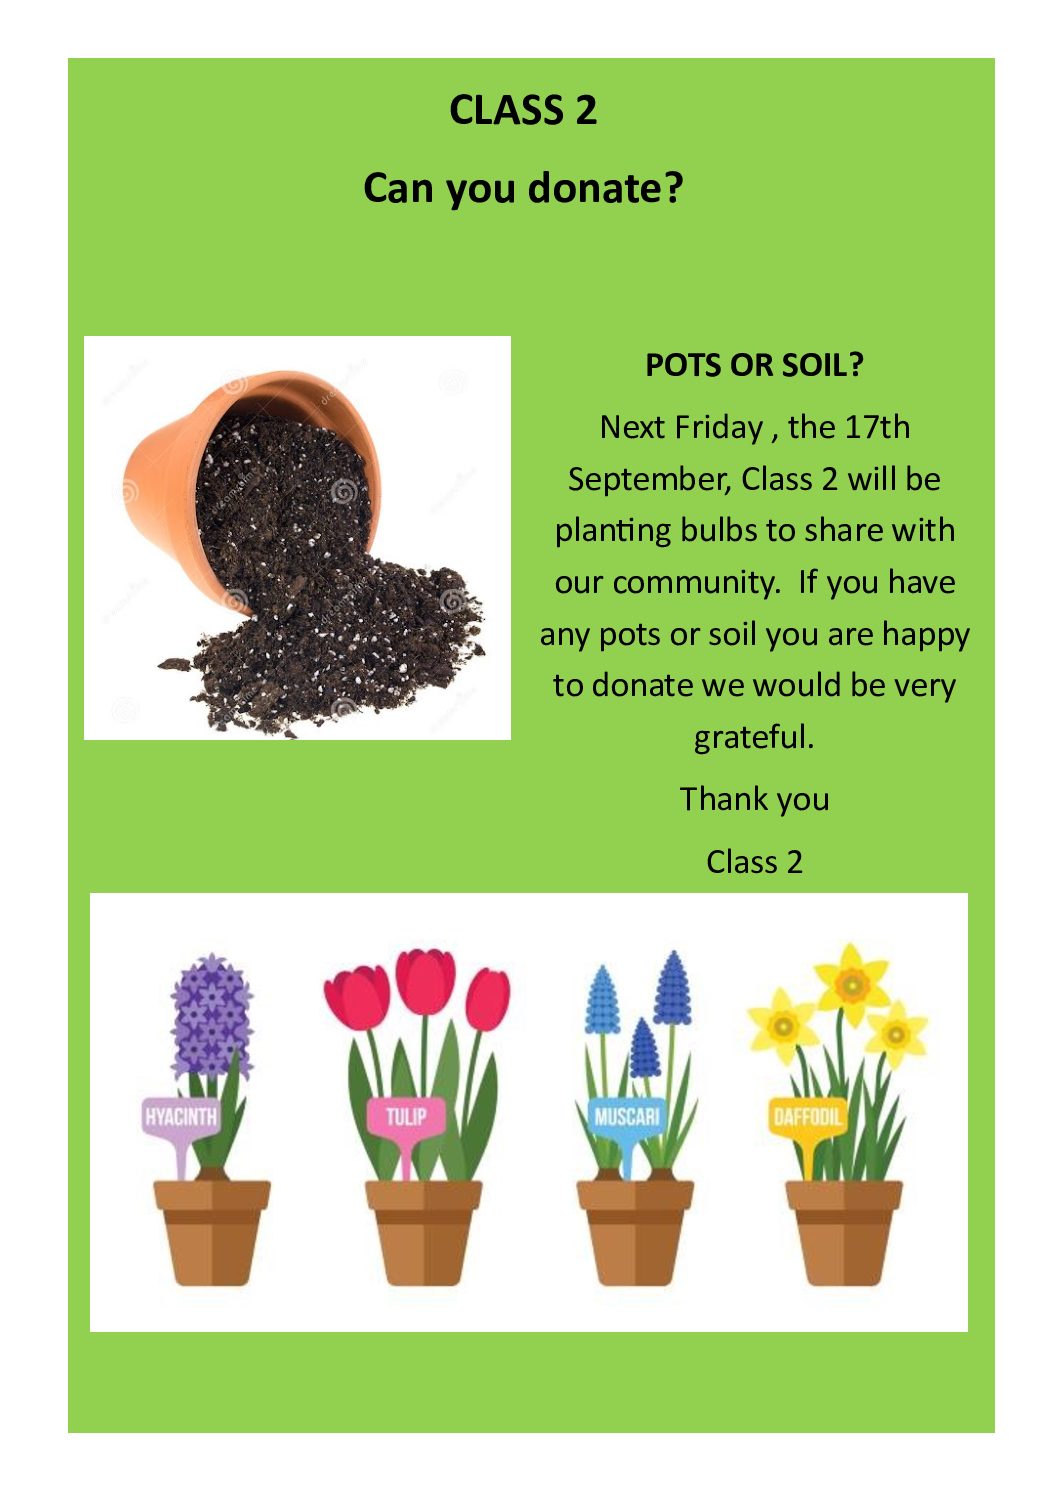 Can you donate – pots or soil?